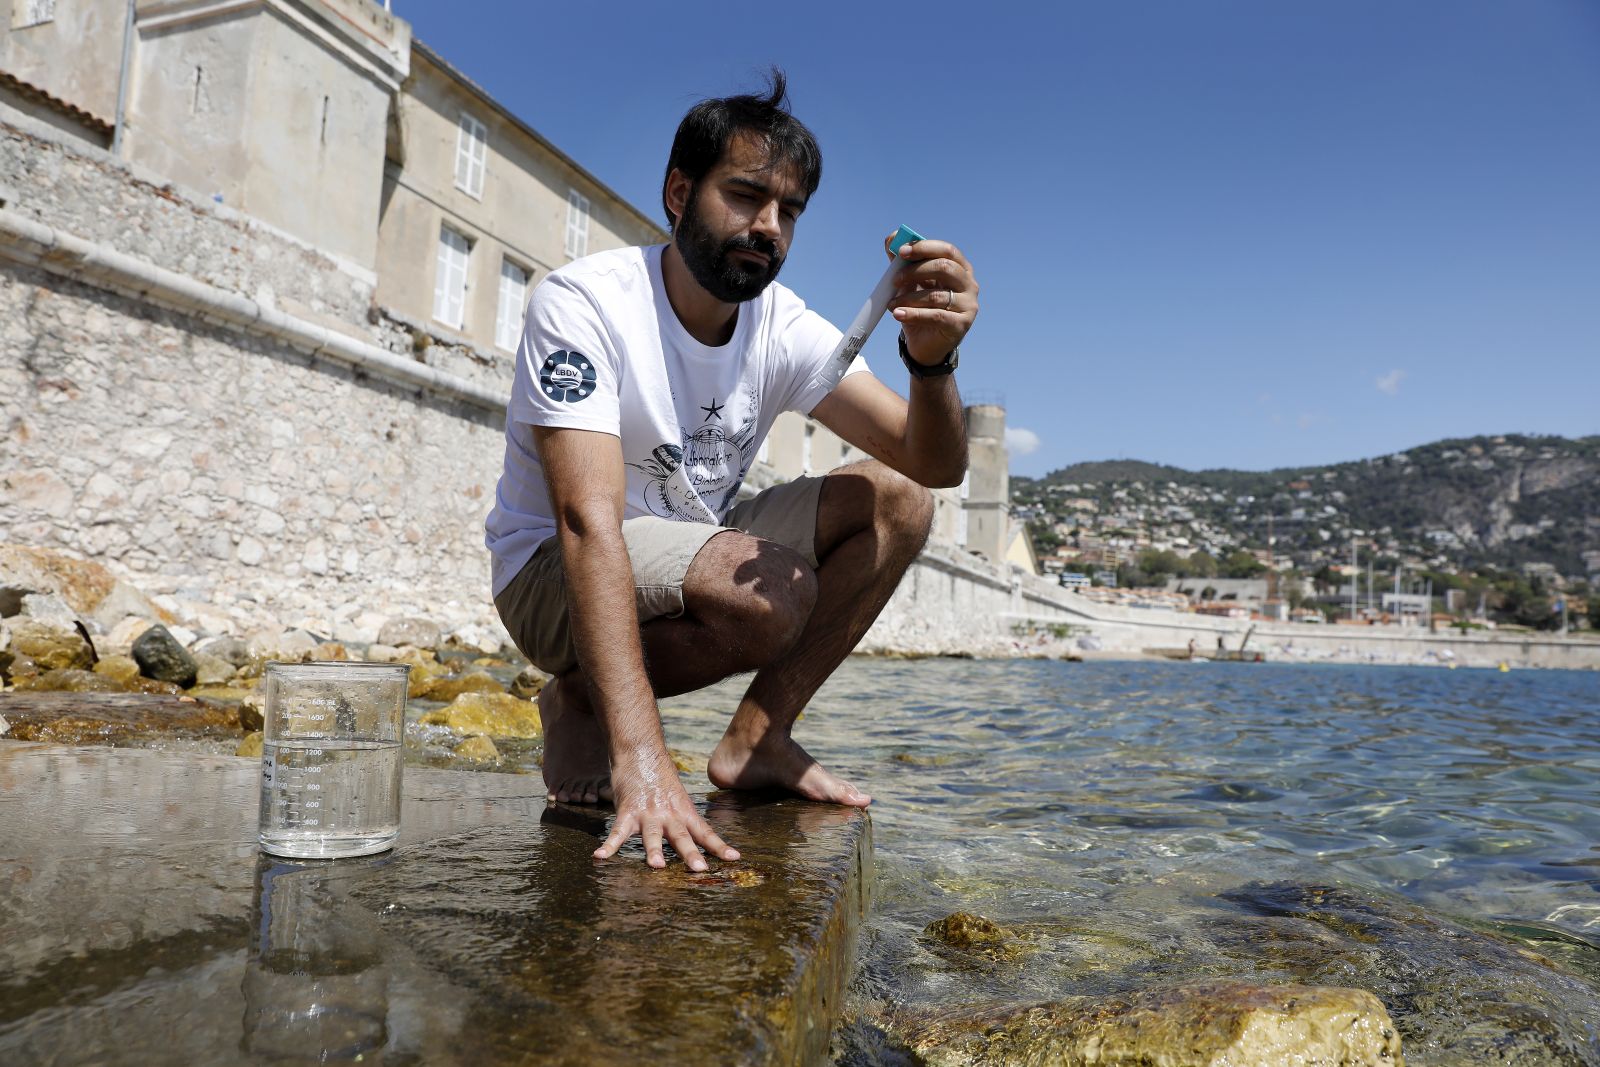 epa10784284 Joao Carvalho of the Sorbonne Institute measures the temperature of the Mediterranean Sea waters in Villefranche-sur-Mer, France, 04 August 2023. The water temperature of the Mediterranean Sea has reached a record high of up to 28.5 degrees Celcius in some places along the French Riviera coast.  EPA/SEBASTIEN NOGIER